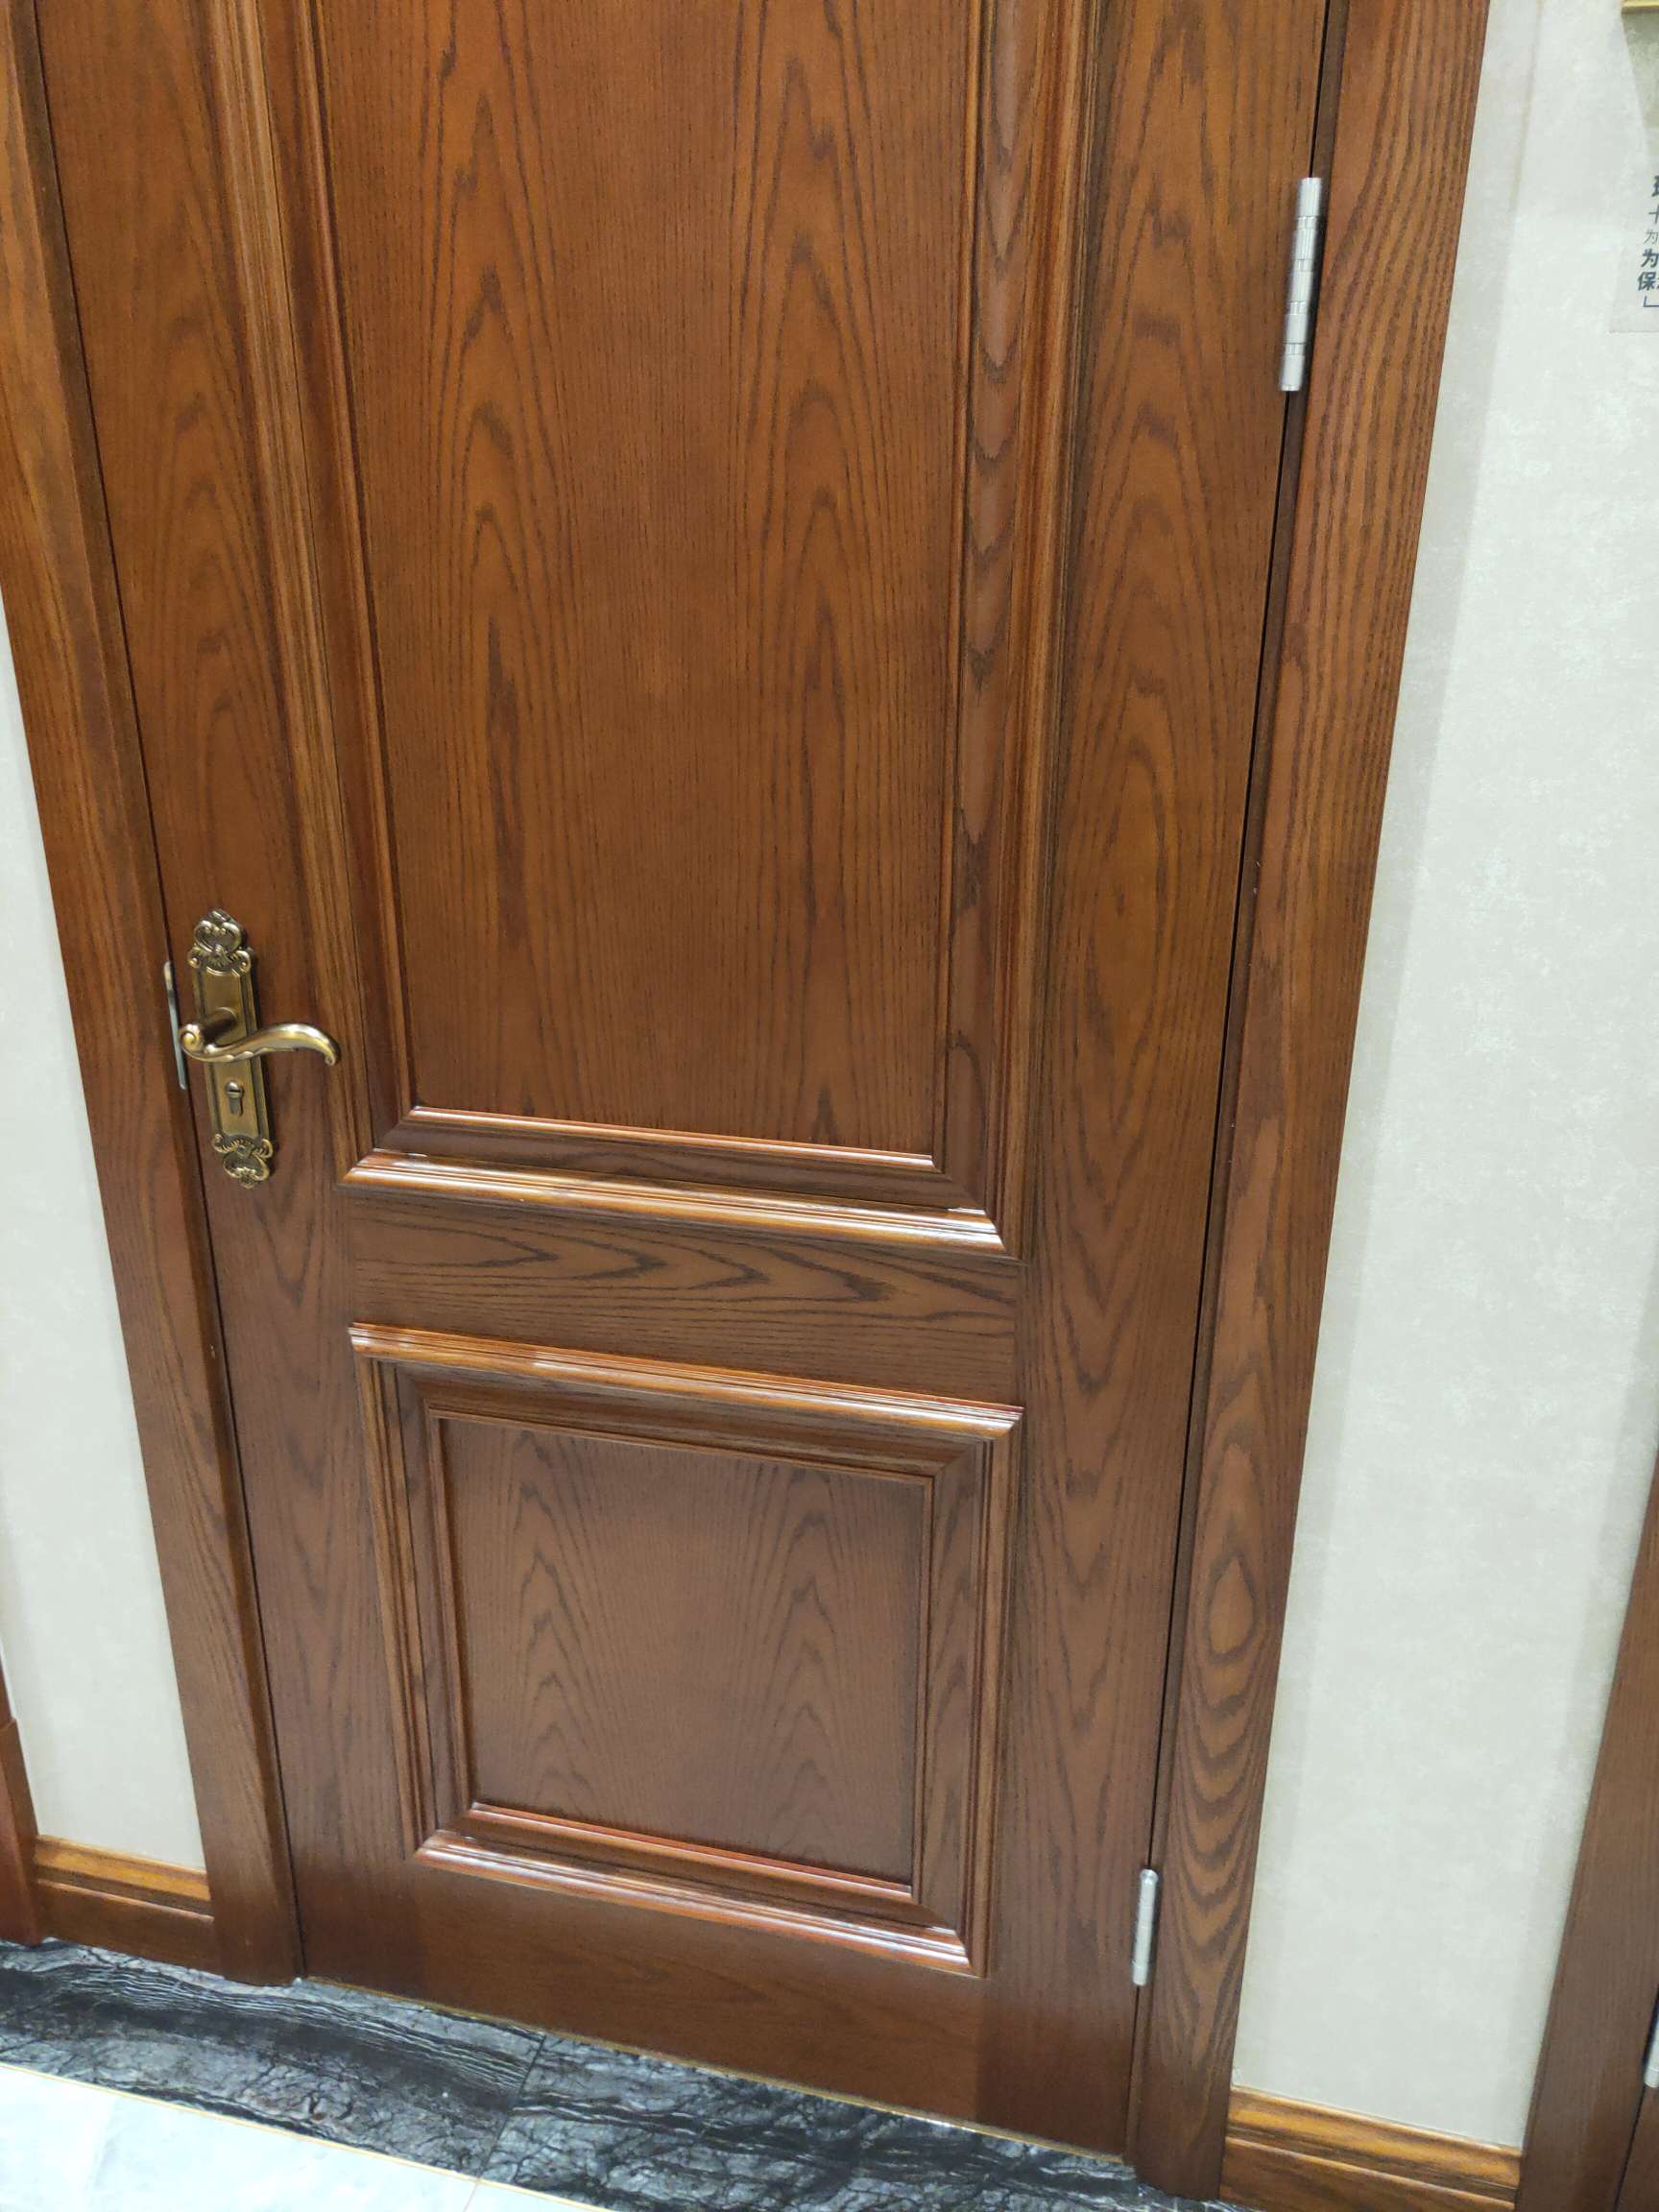 The door is suitable for new Chinese style, brawl style and American style